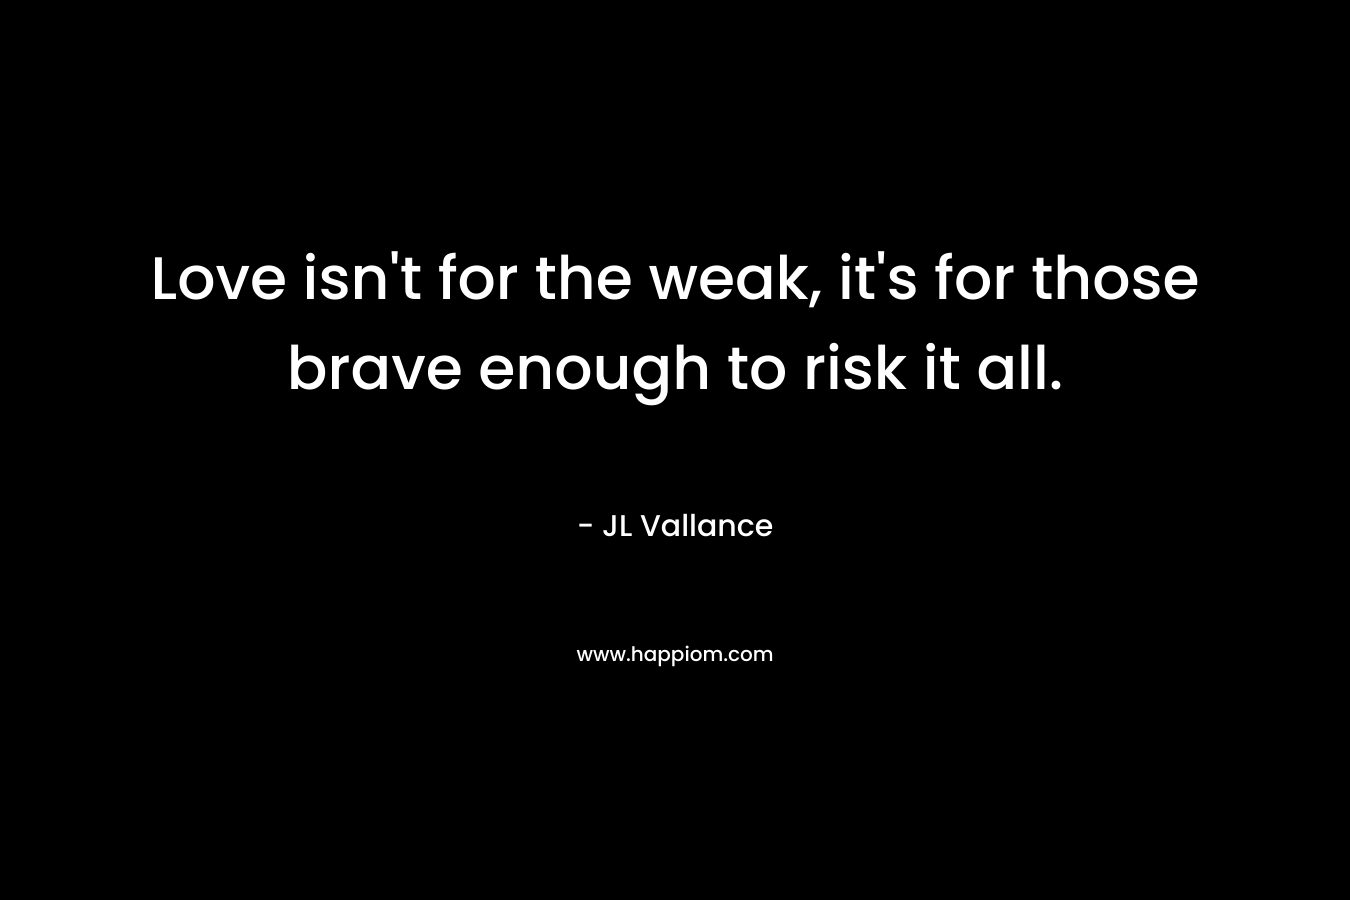 Love isn't for the weak, it's for those brave enough to risk it all.